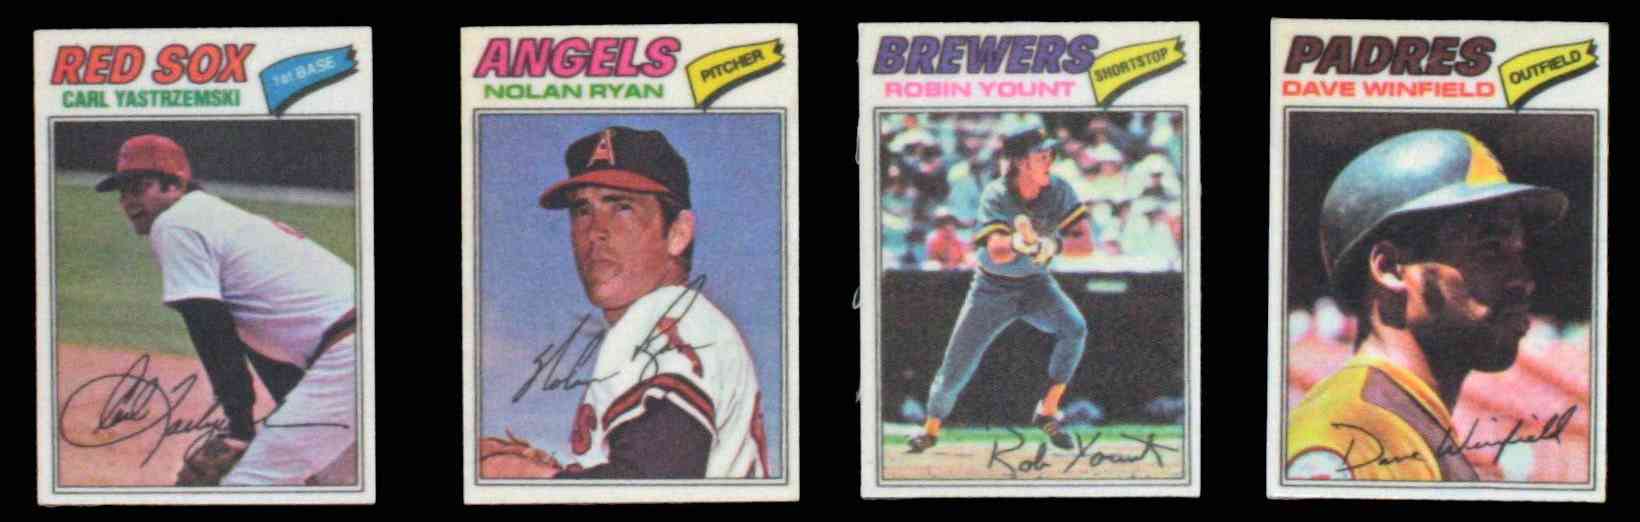 1977 Topps Cloth Stickers #54 Robin Yount [** VAR:] (Brewers) Baseball cards value